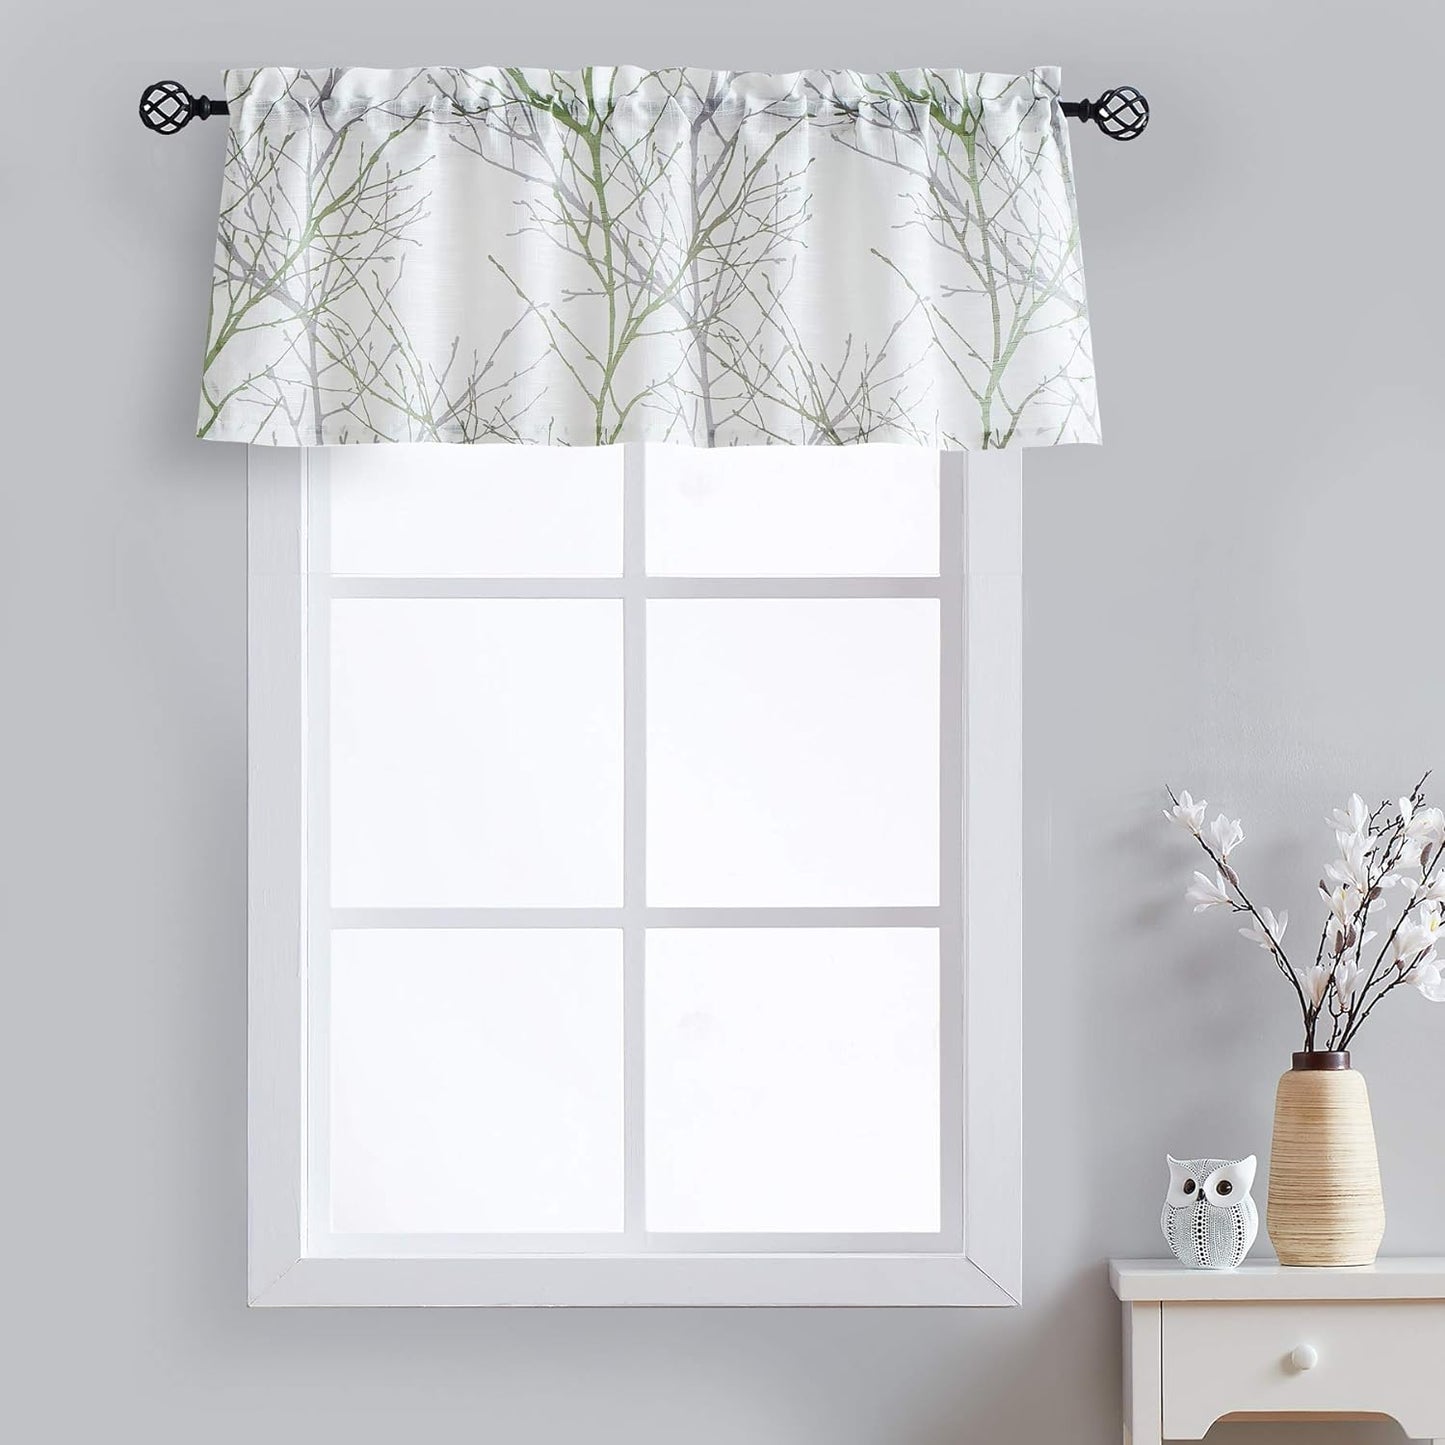 FMFUNCTEX Blue White Curtains for Kitchen Living Room 72“ Grey Tree Branches Print Curtain Set for Small Windows Linen Textured Semi-Sheer Drapes for Bedroom Grommet Top, 2 Panels  Fmfunctex Green 50" X 18" 1Pc 